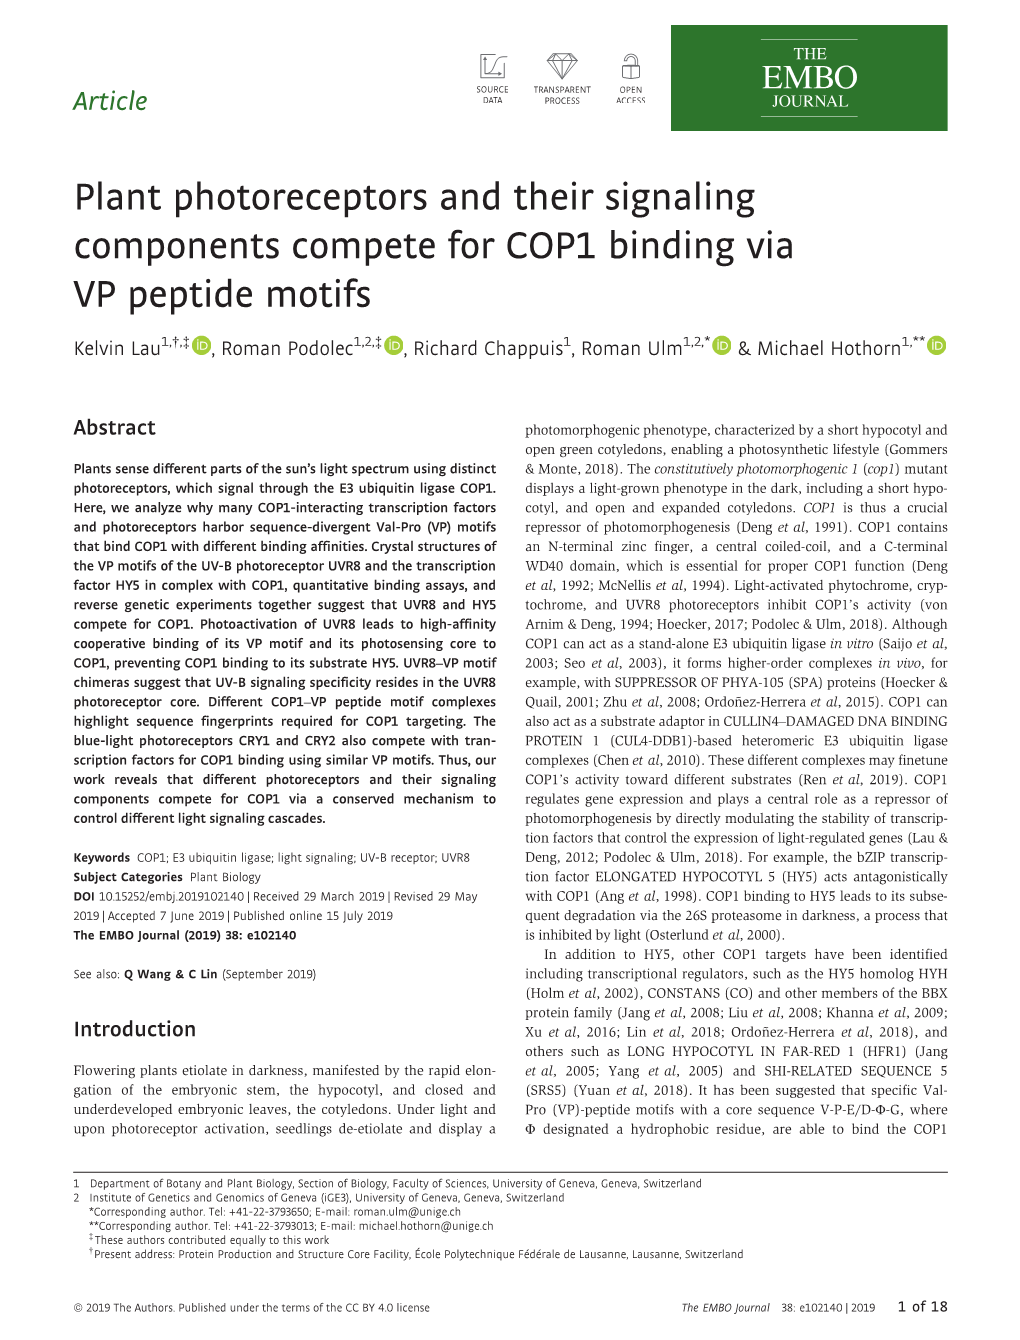 Plant Photoreceptors and Their Signaling Components Compete for COP1 Binding Via VP Peptide Motifs